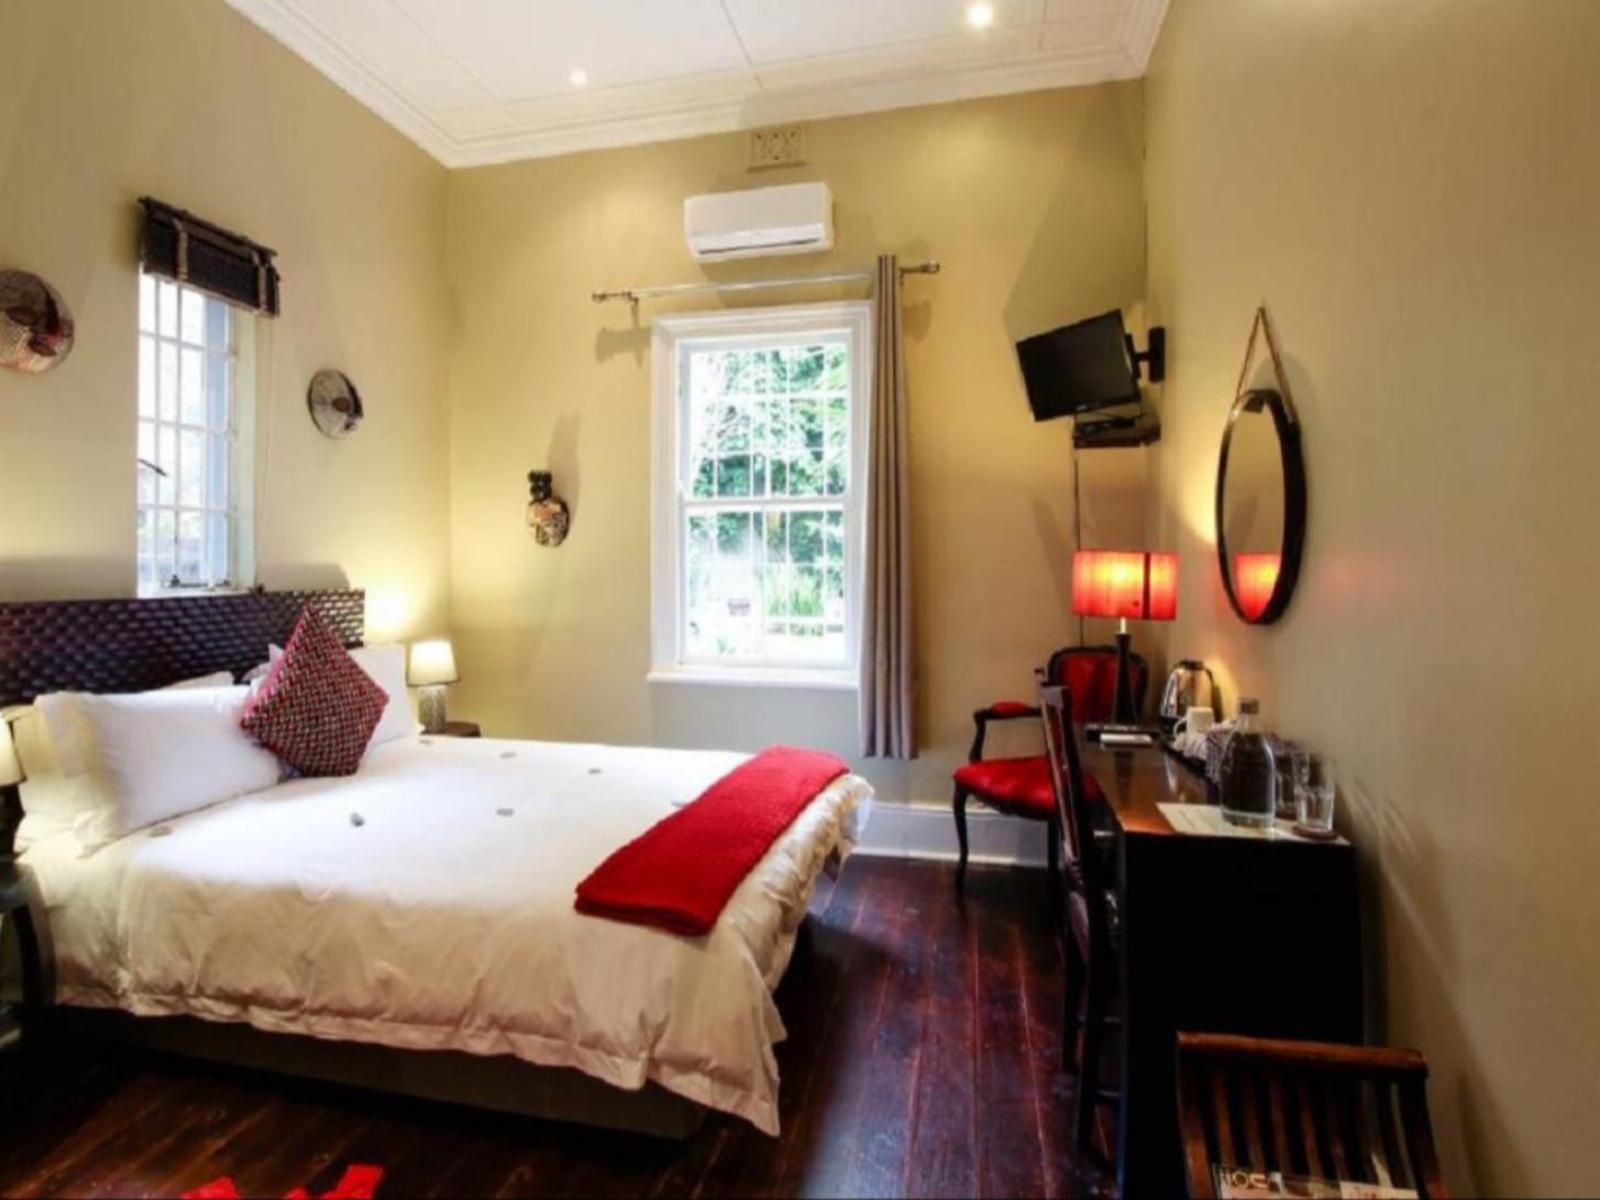 Jardin D Ebene Boutique Guest House Tamboerskloof Cape Town Western Cape South Africa Window, Architecture, Bedroom